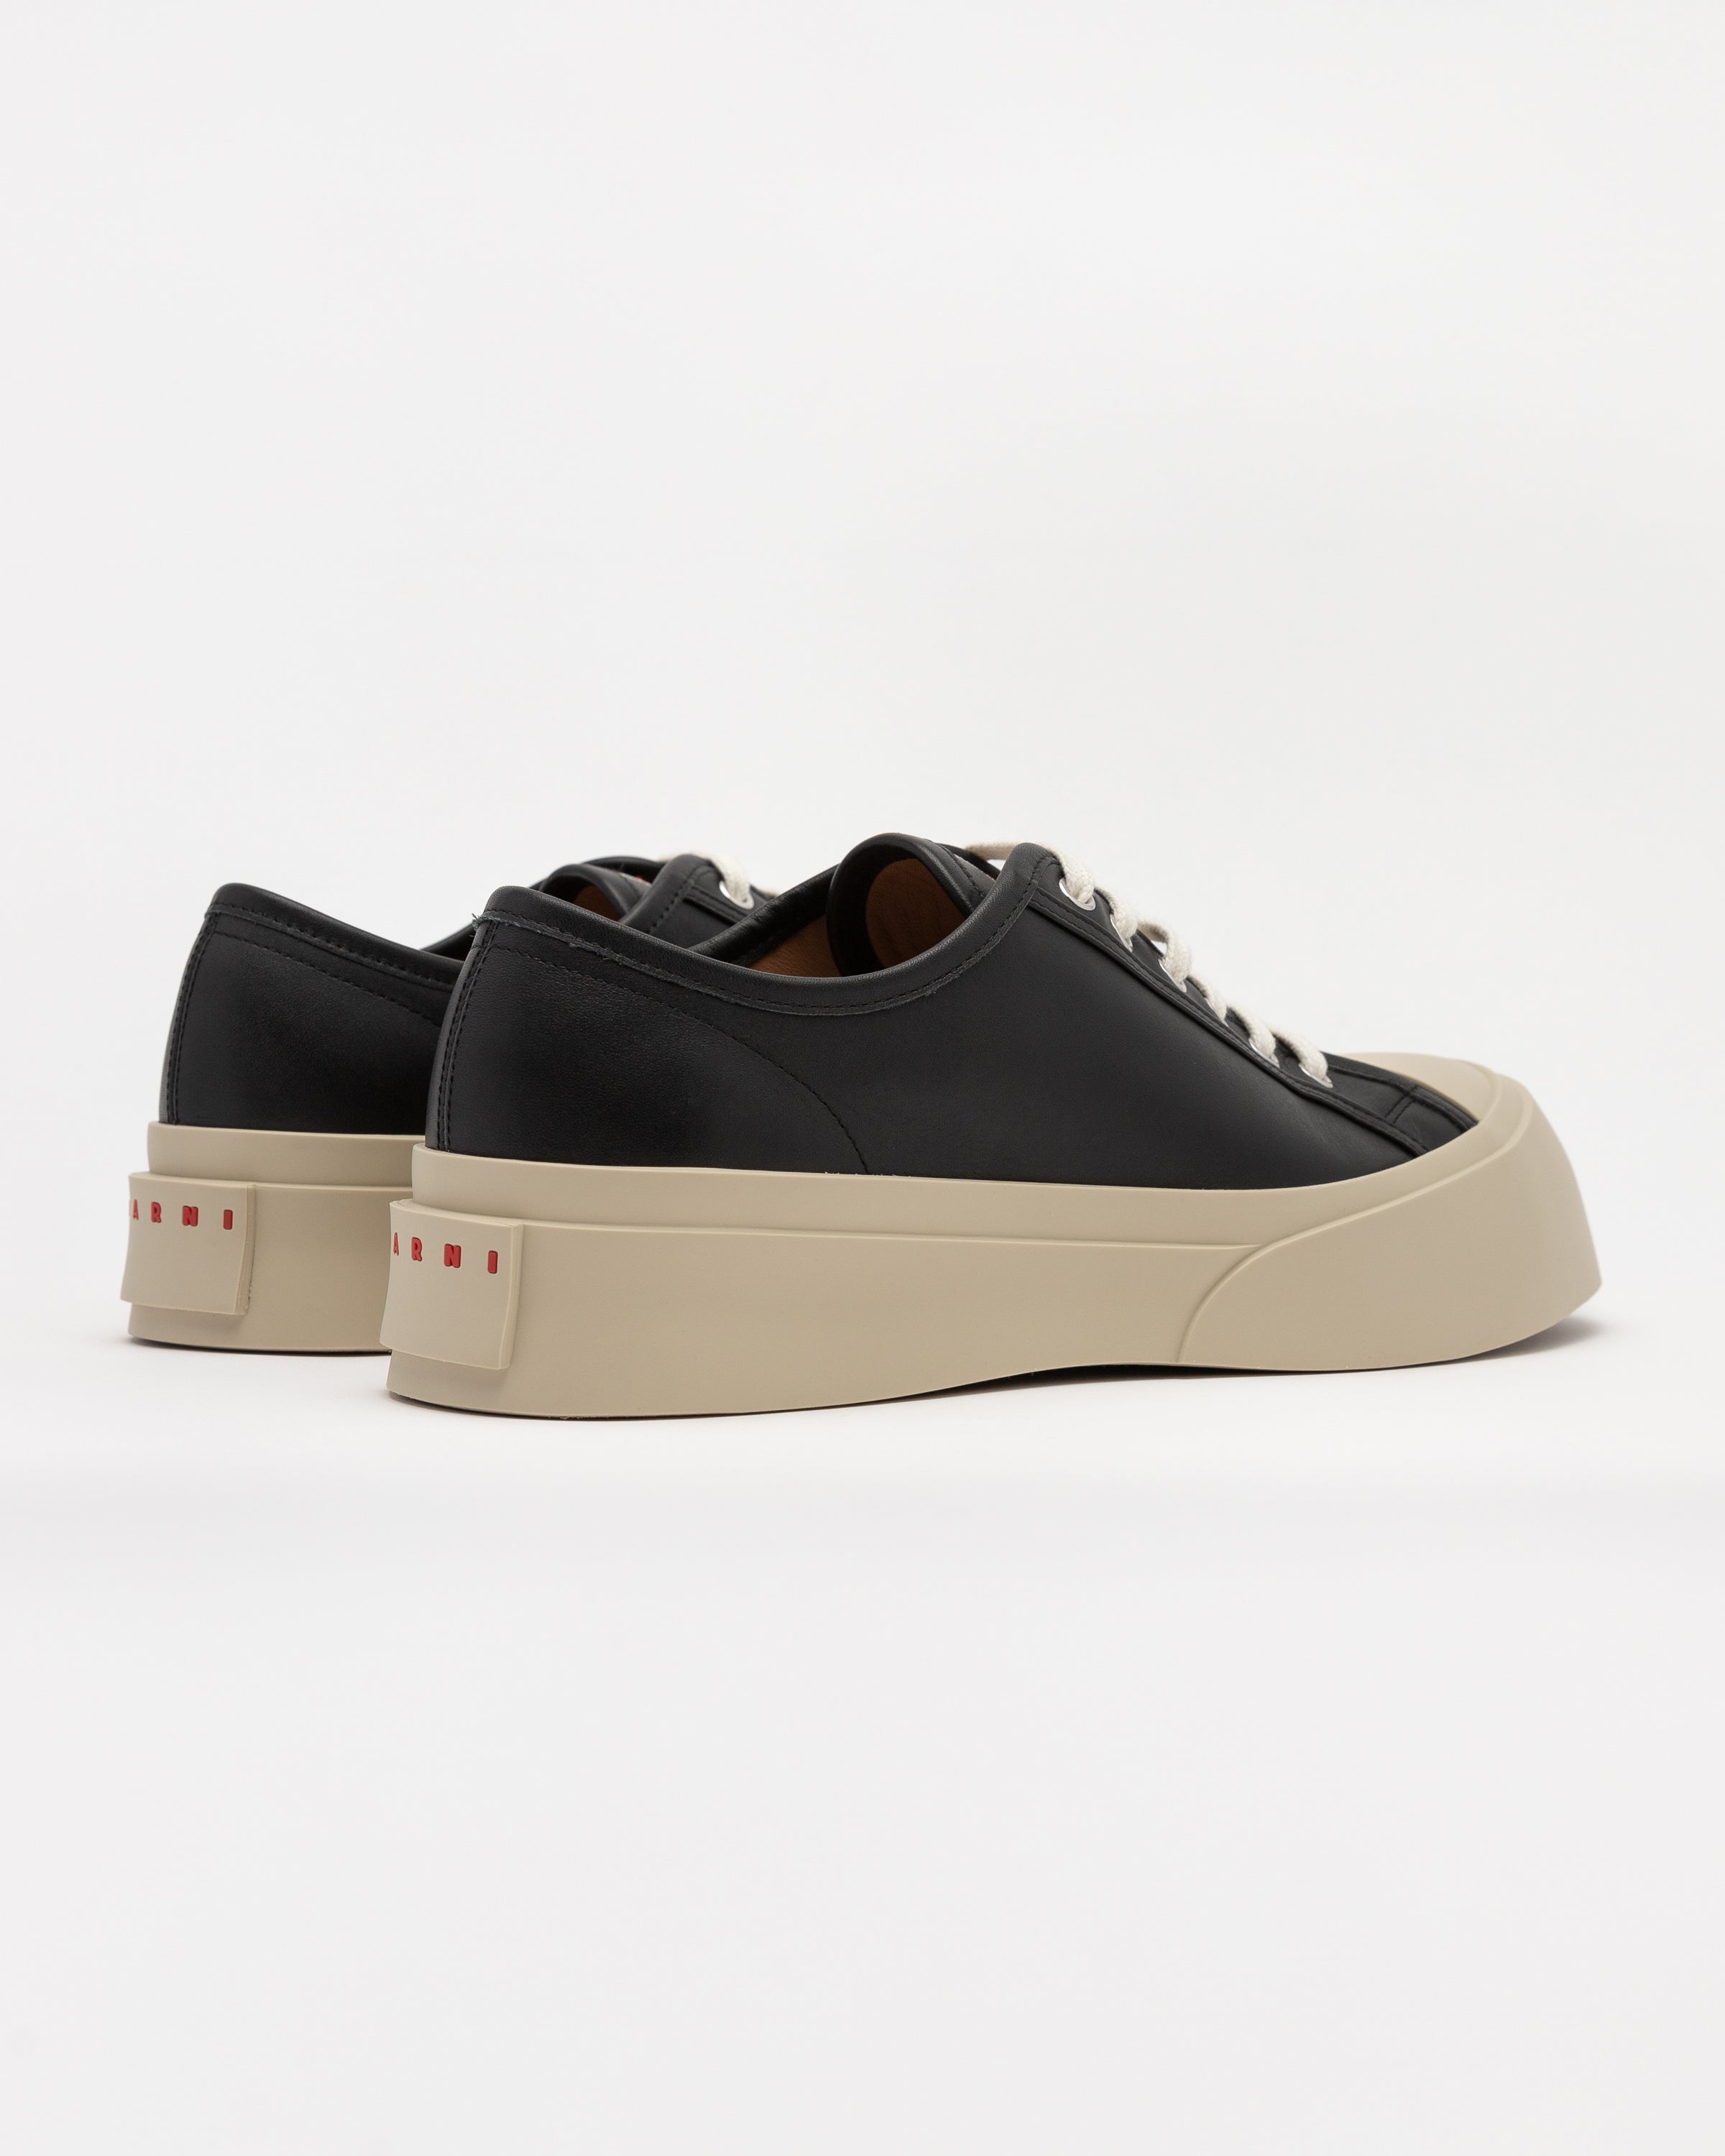 Pablo Lace-Up Sneaker in Black